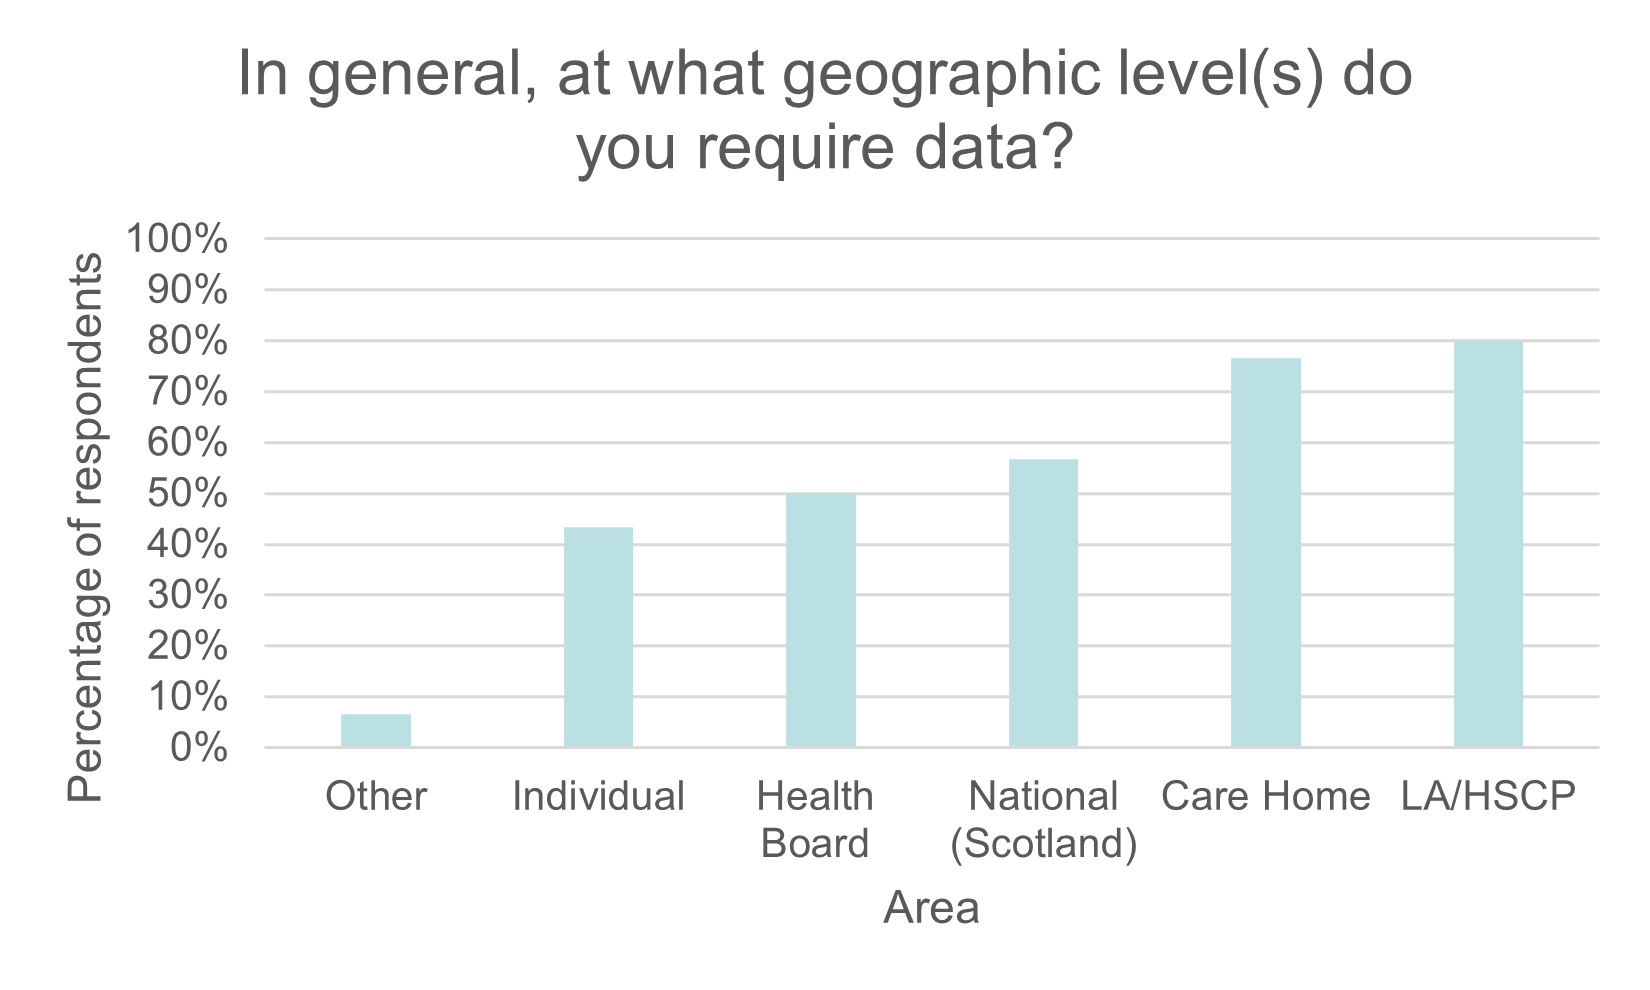 This chart shows the geographic data that respondents needed. This is broken down by: LA/HSCP, Care Home, National(Scotland), Health Board, Individual and other.